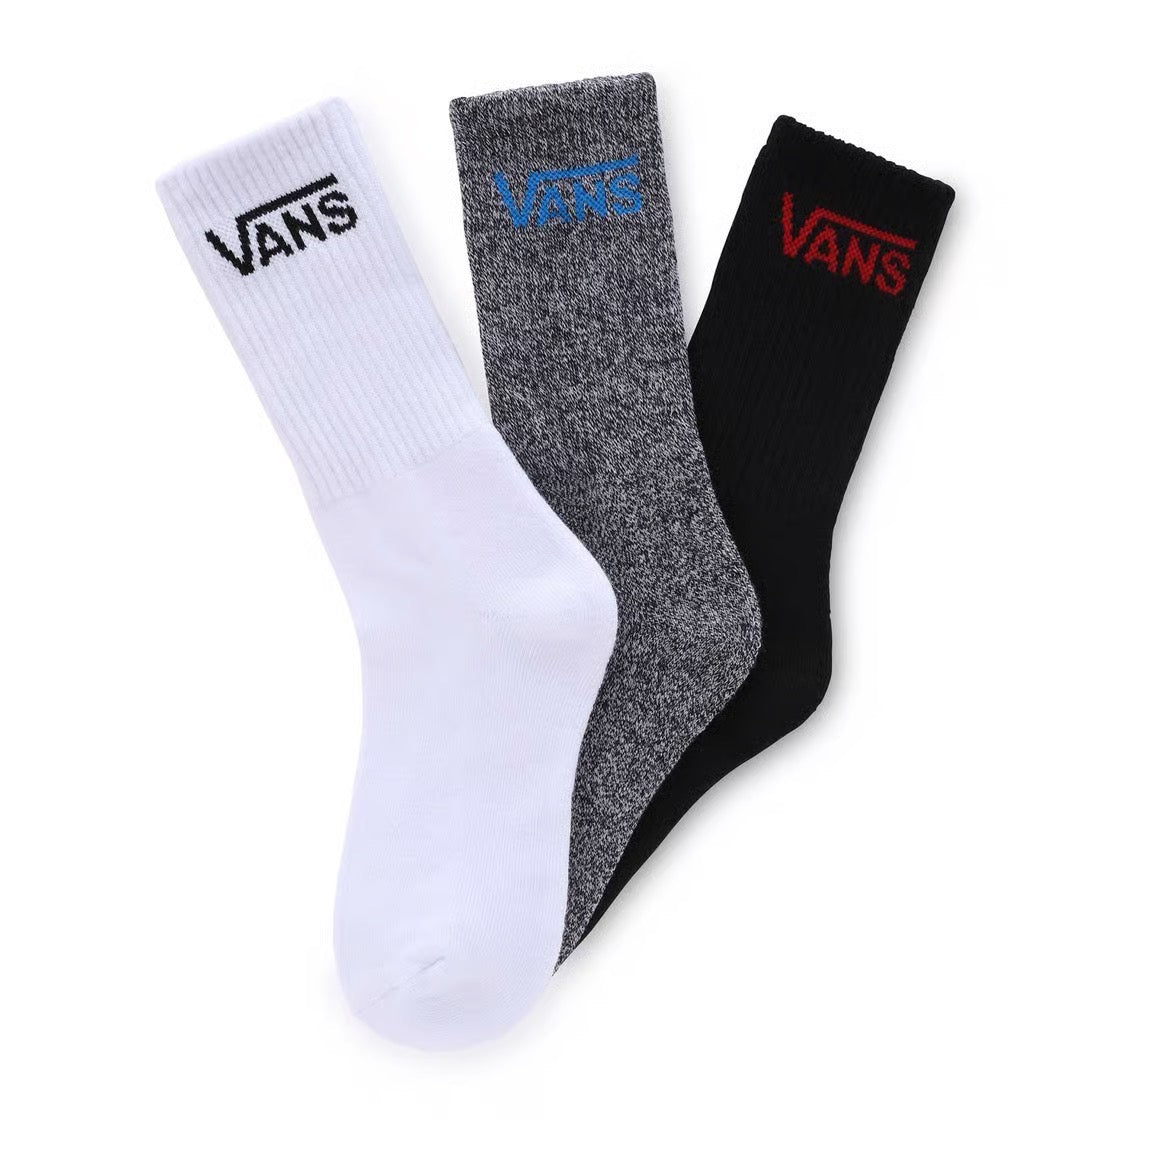 Vans Youth 3 Pack Socks Vn00054bwtm1 Clothing ONE SIZE / Multi